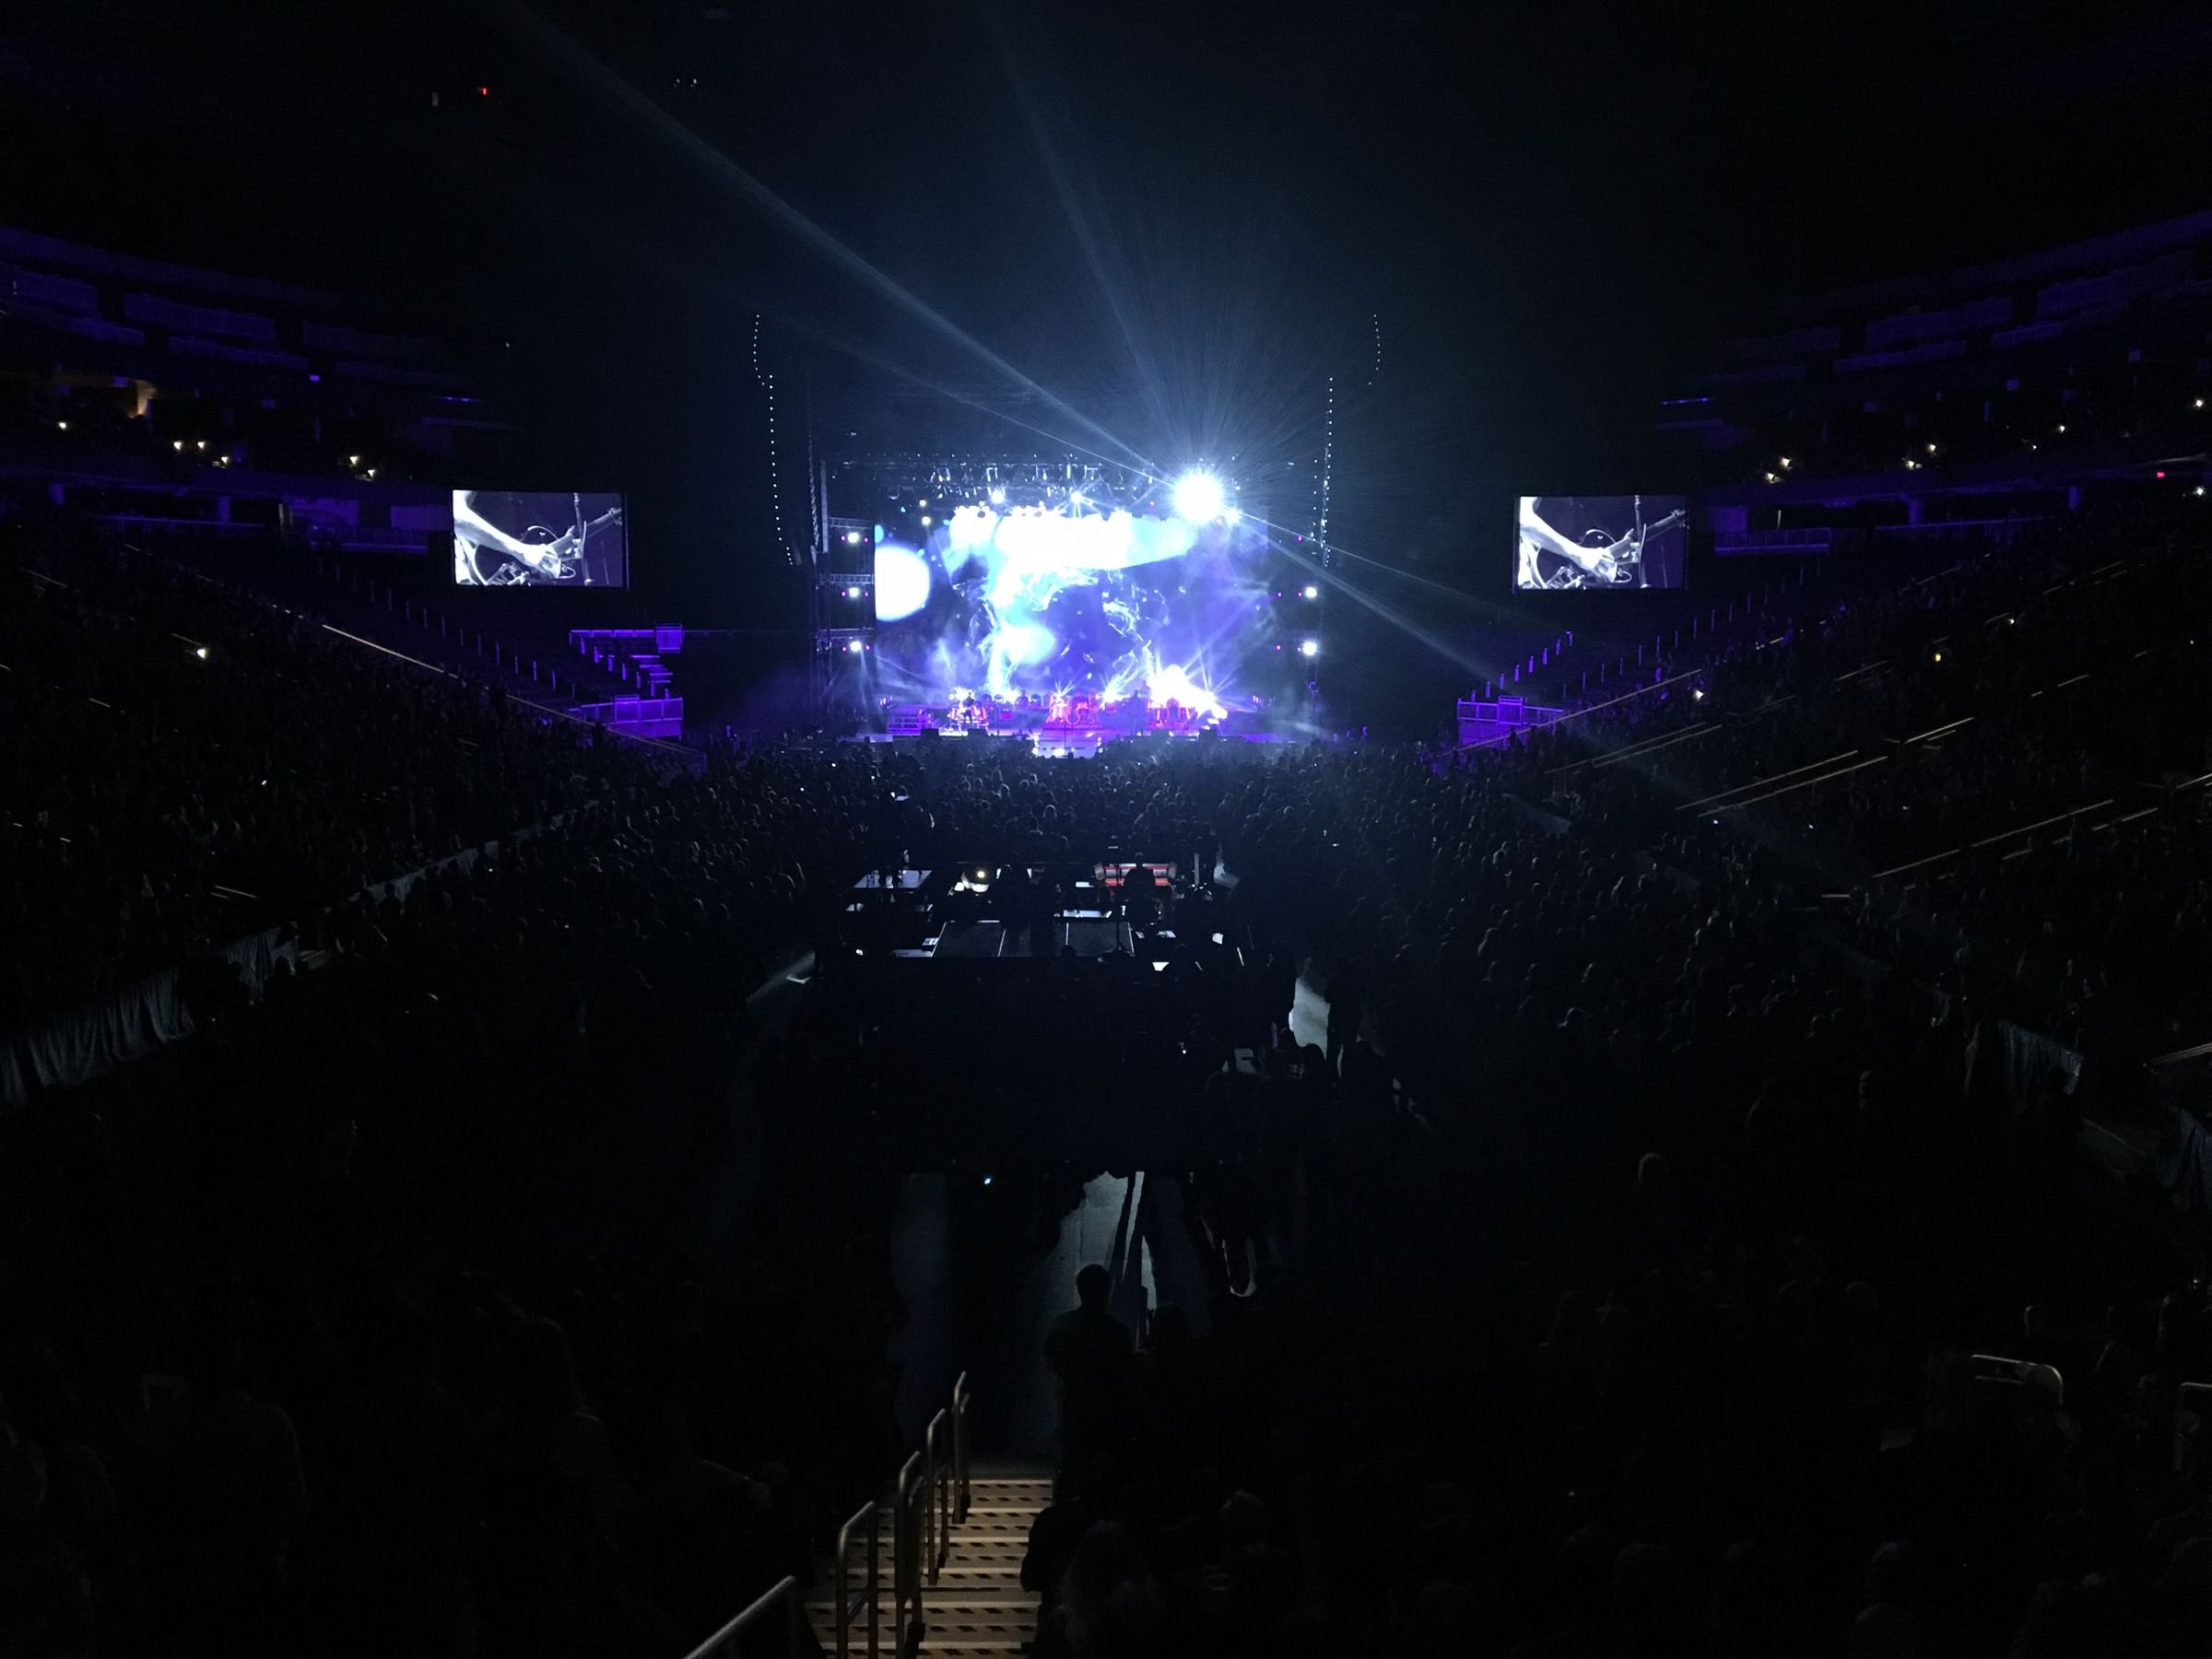 head-on concert view at Rogers Place